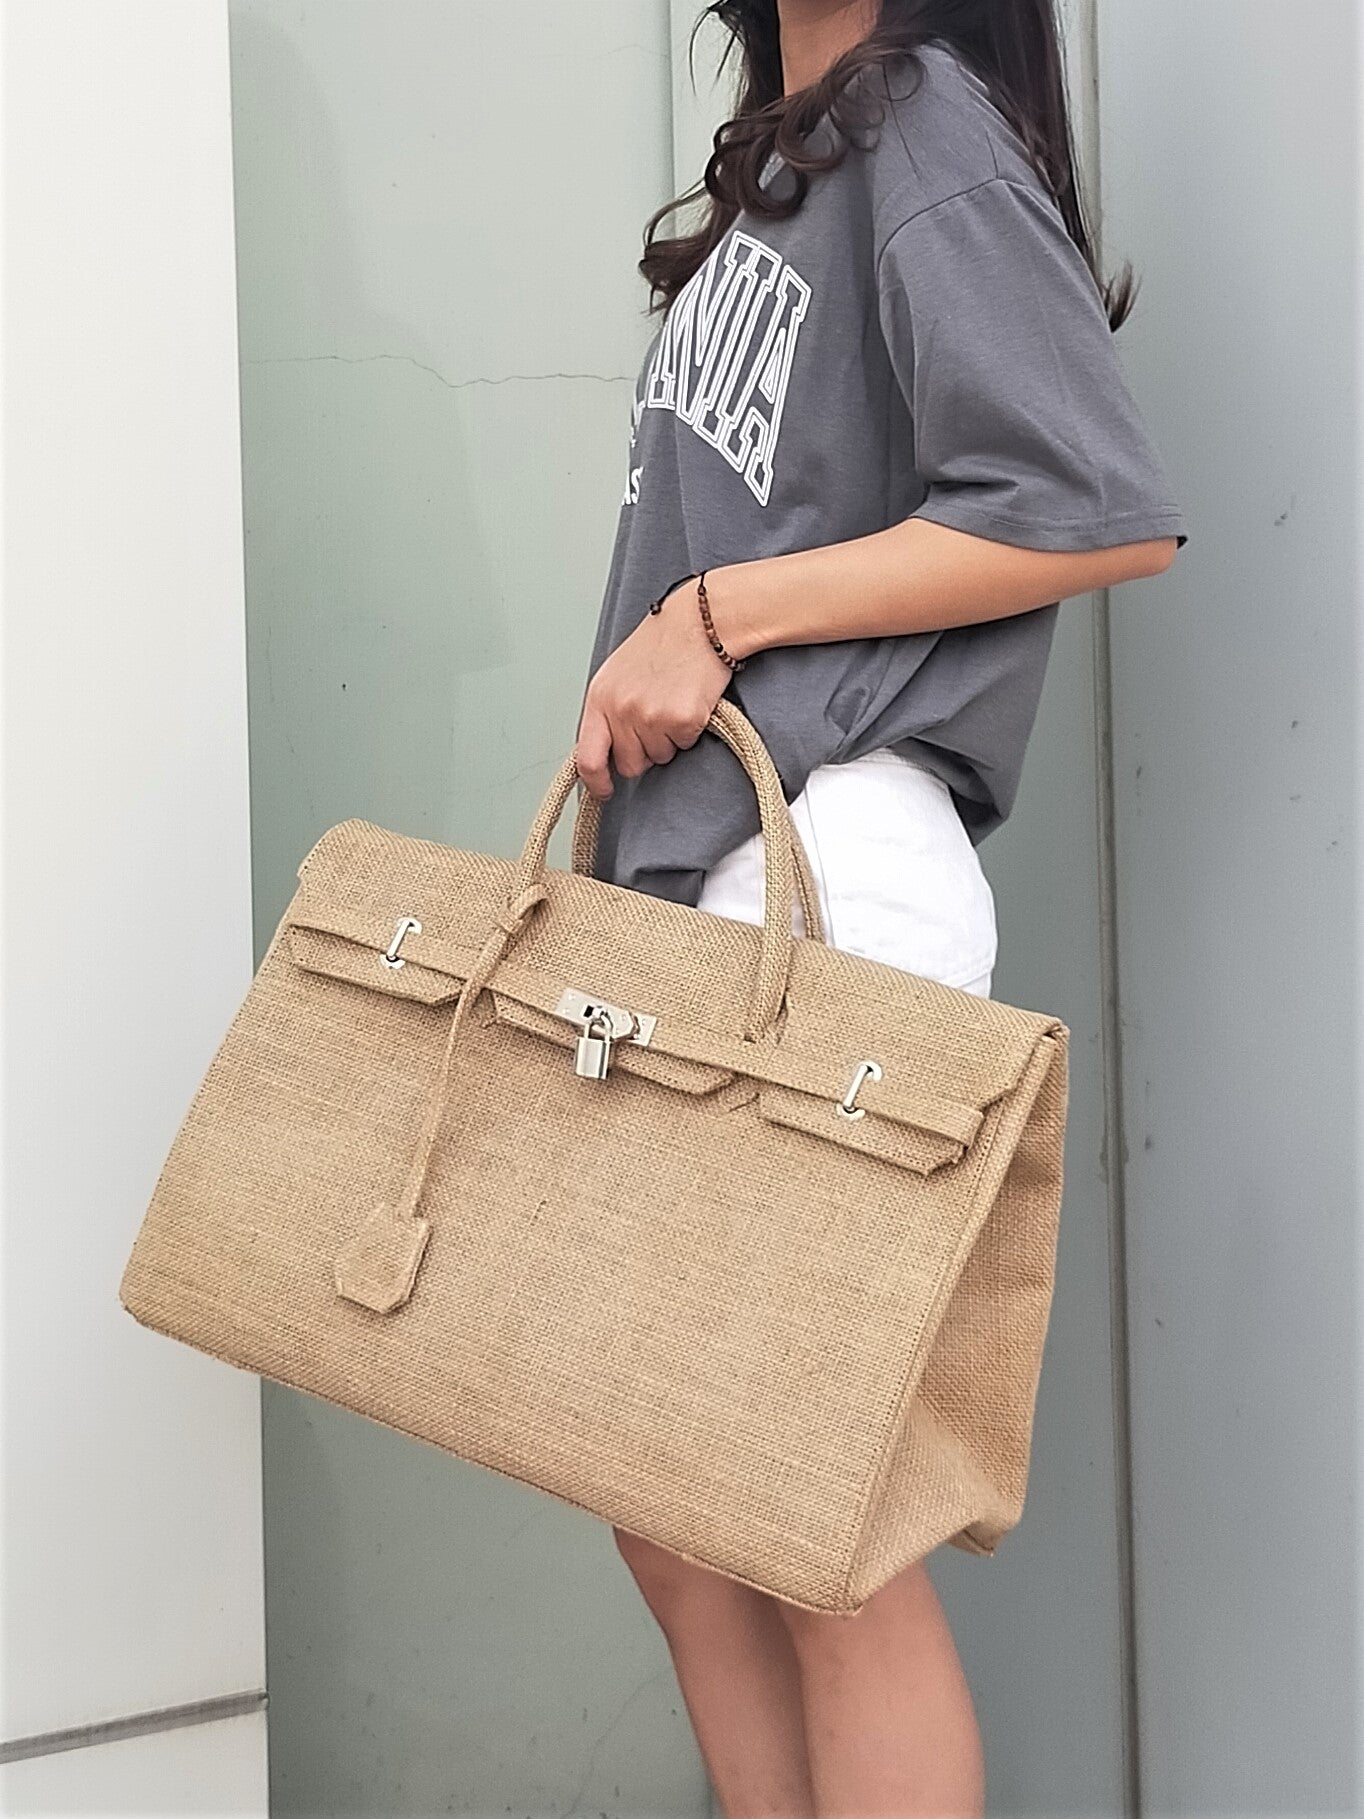 Jute Tote Bags : , Burlap for Wedding and Special Events